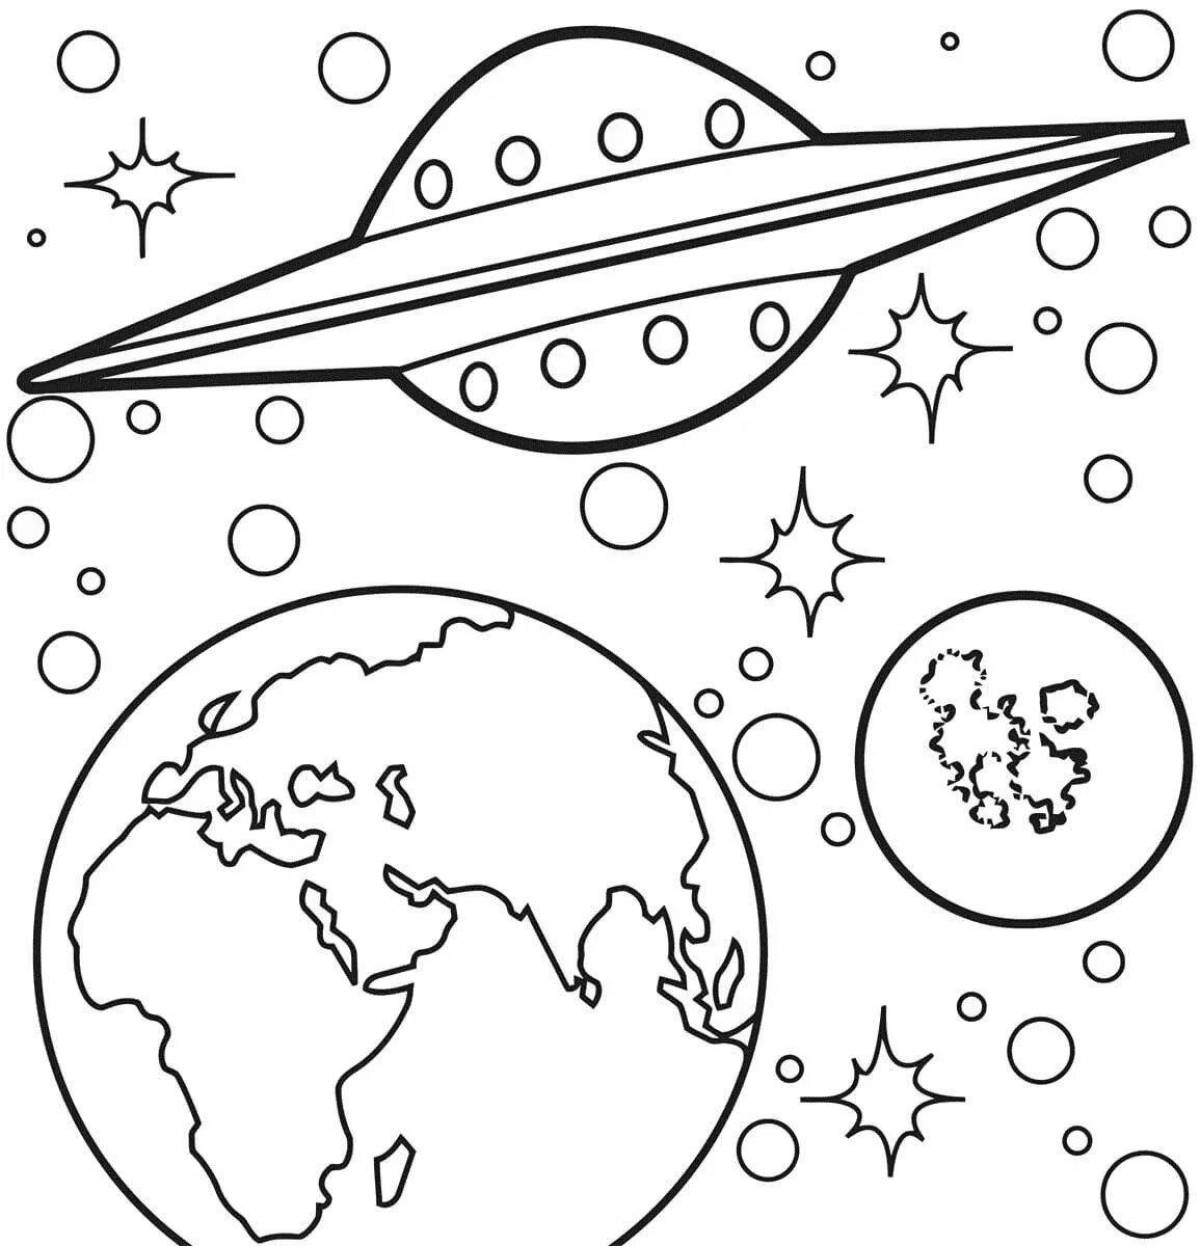 Space and planets for kids #4